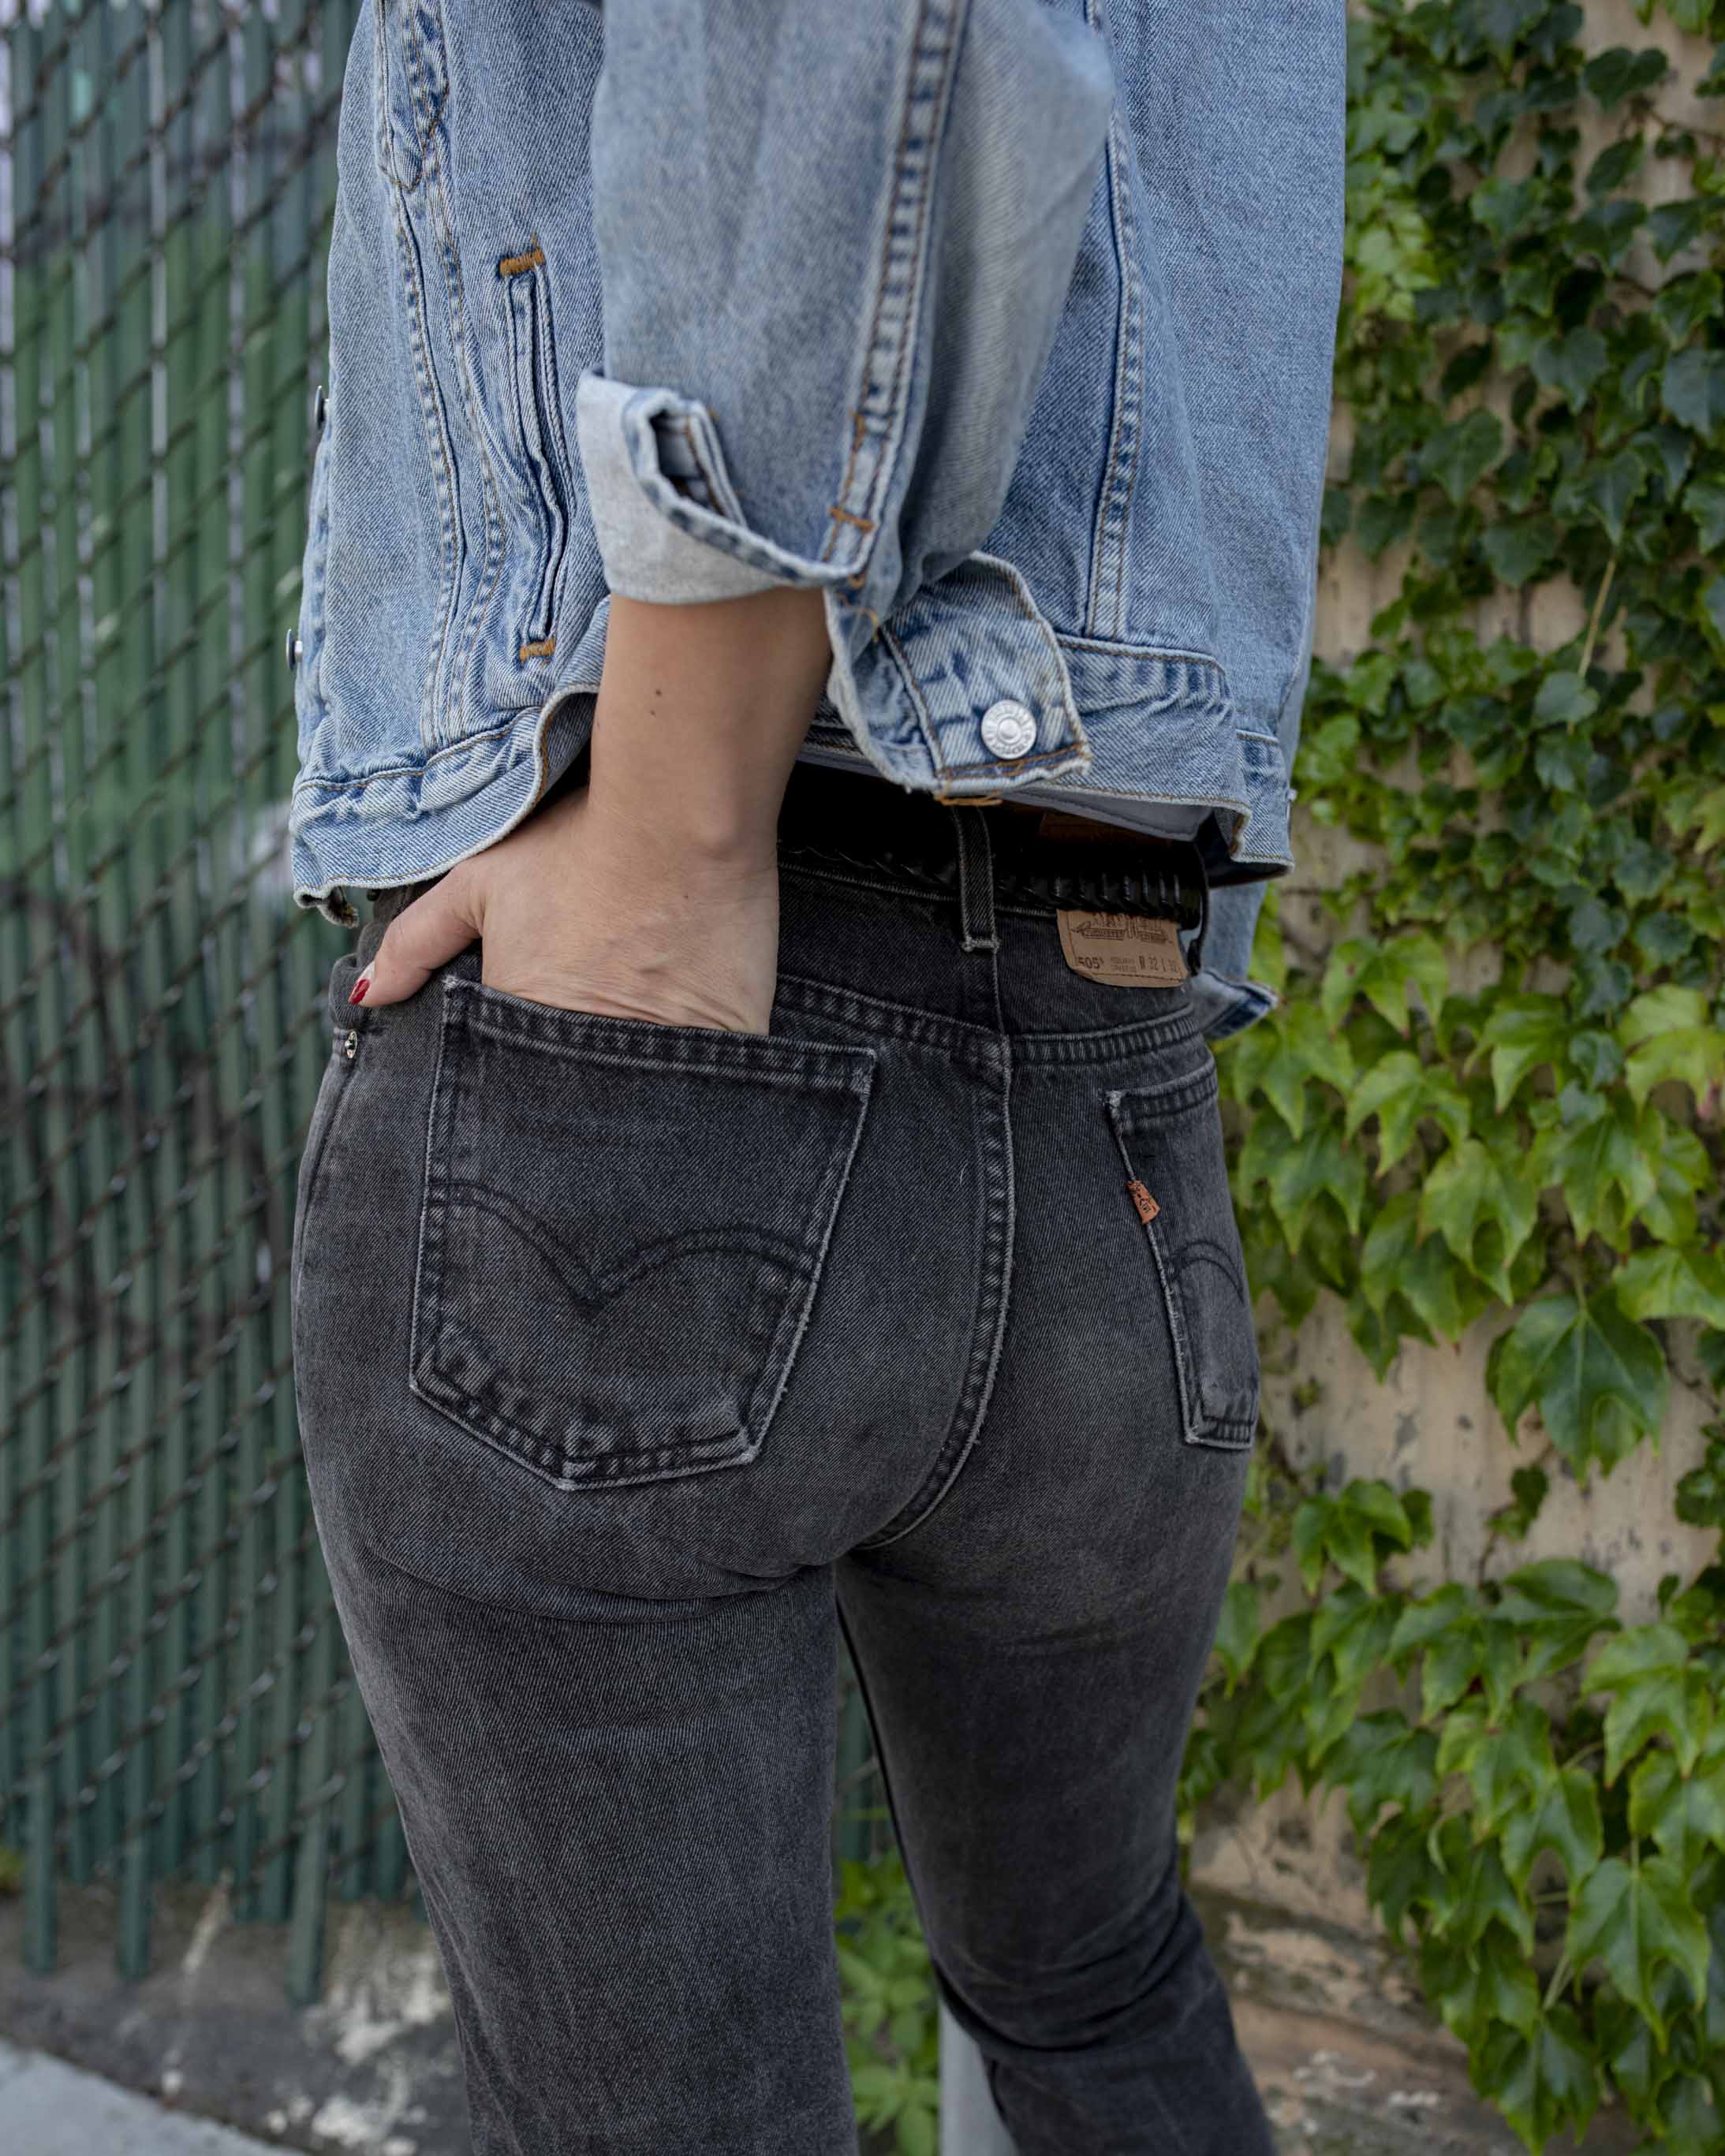 Hunting for Vintage Levi's Jeans? Here's What to Look For